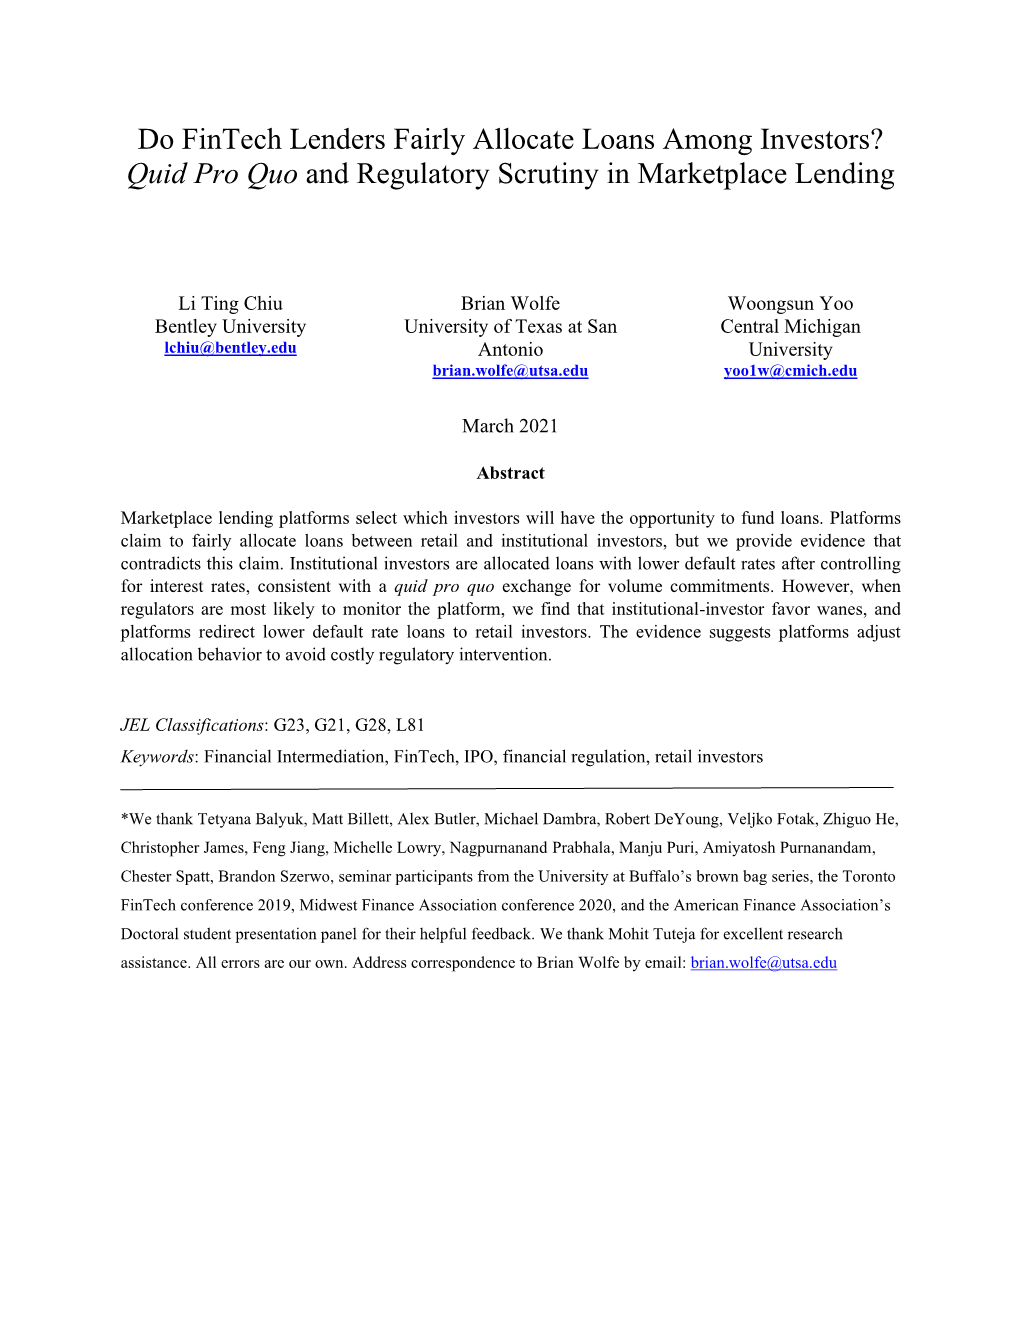 Do Fintech Lenders Fairly Allocate Loans Among Investors? Quid Pro Quo and Regulatory Scrutiny in Marketplace Lending